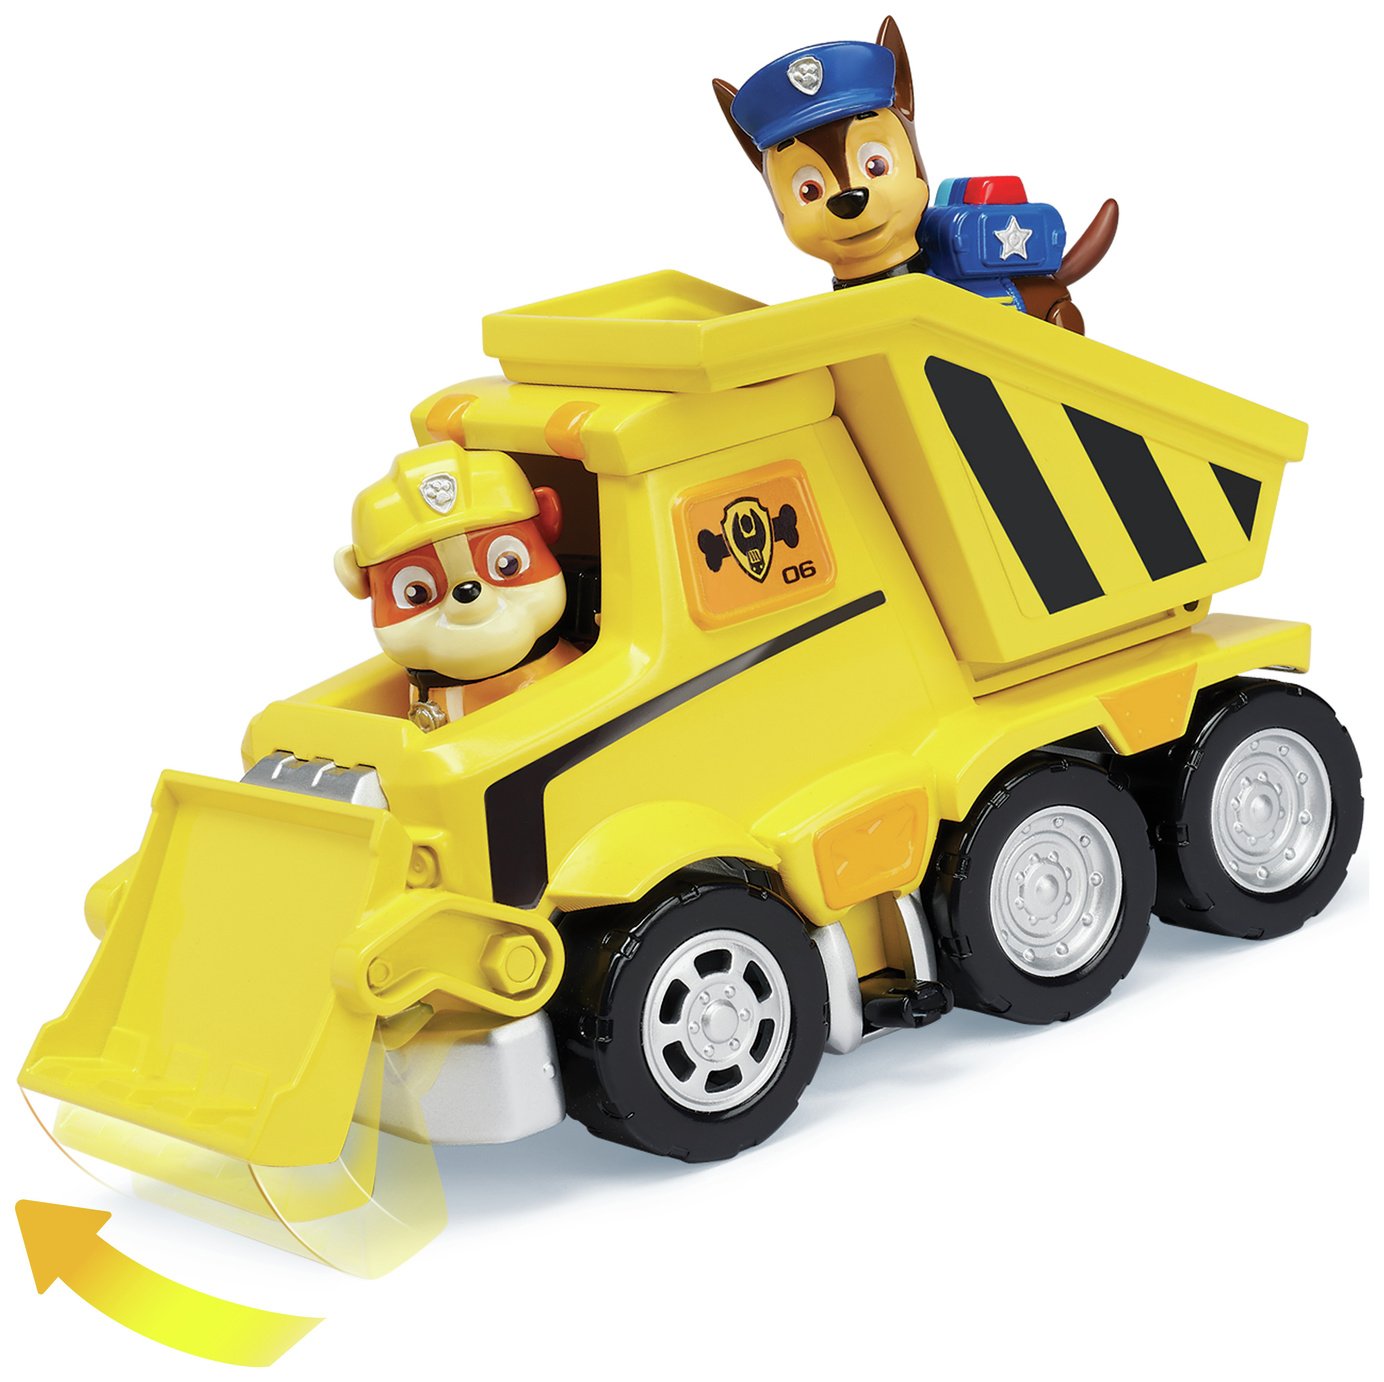 PAW Patrol Ultimate Rescue Vehicle - Rubble